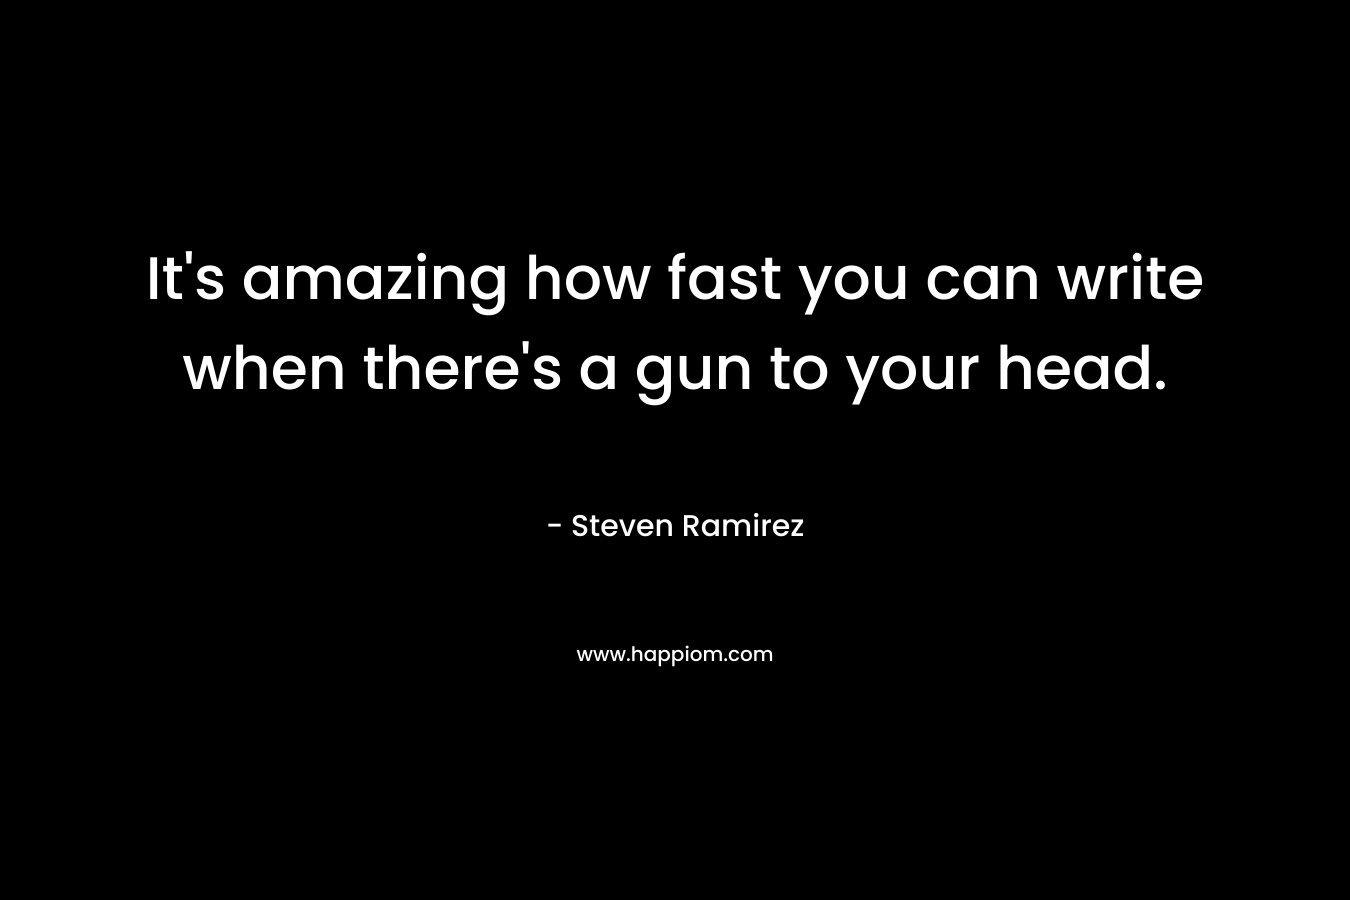 It’s amazing how fast you can write when there’s a gun to your head. – Steven Ramirez